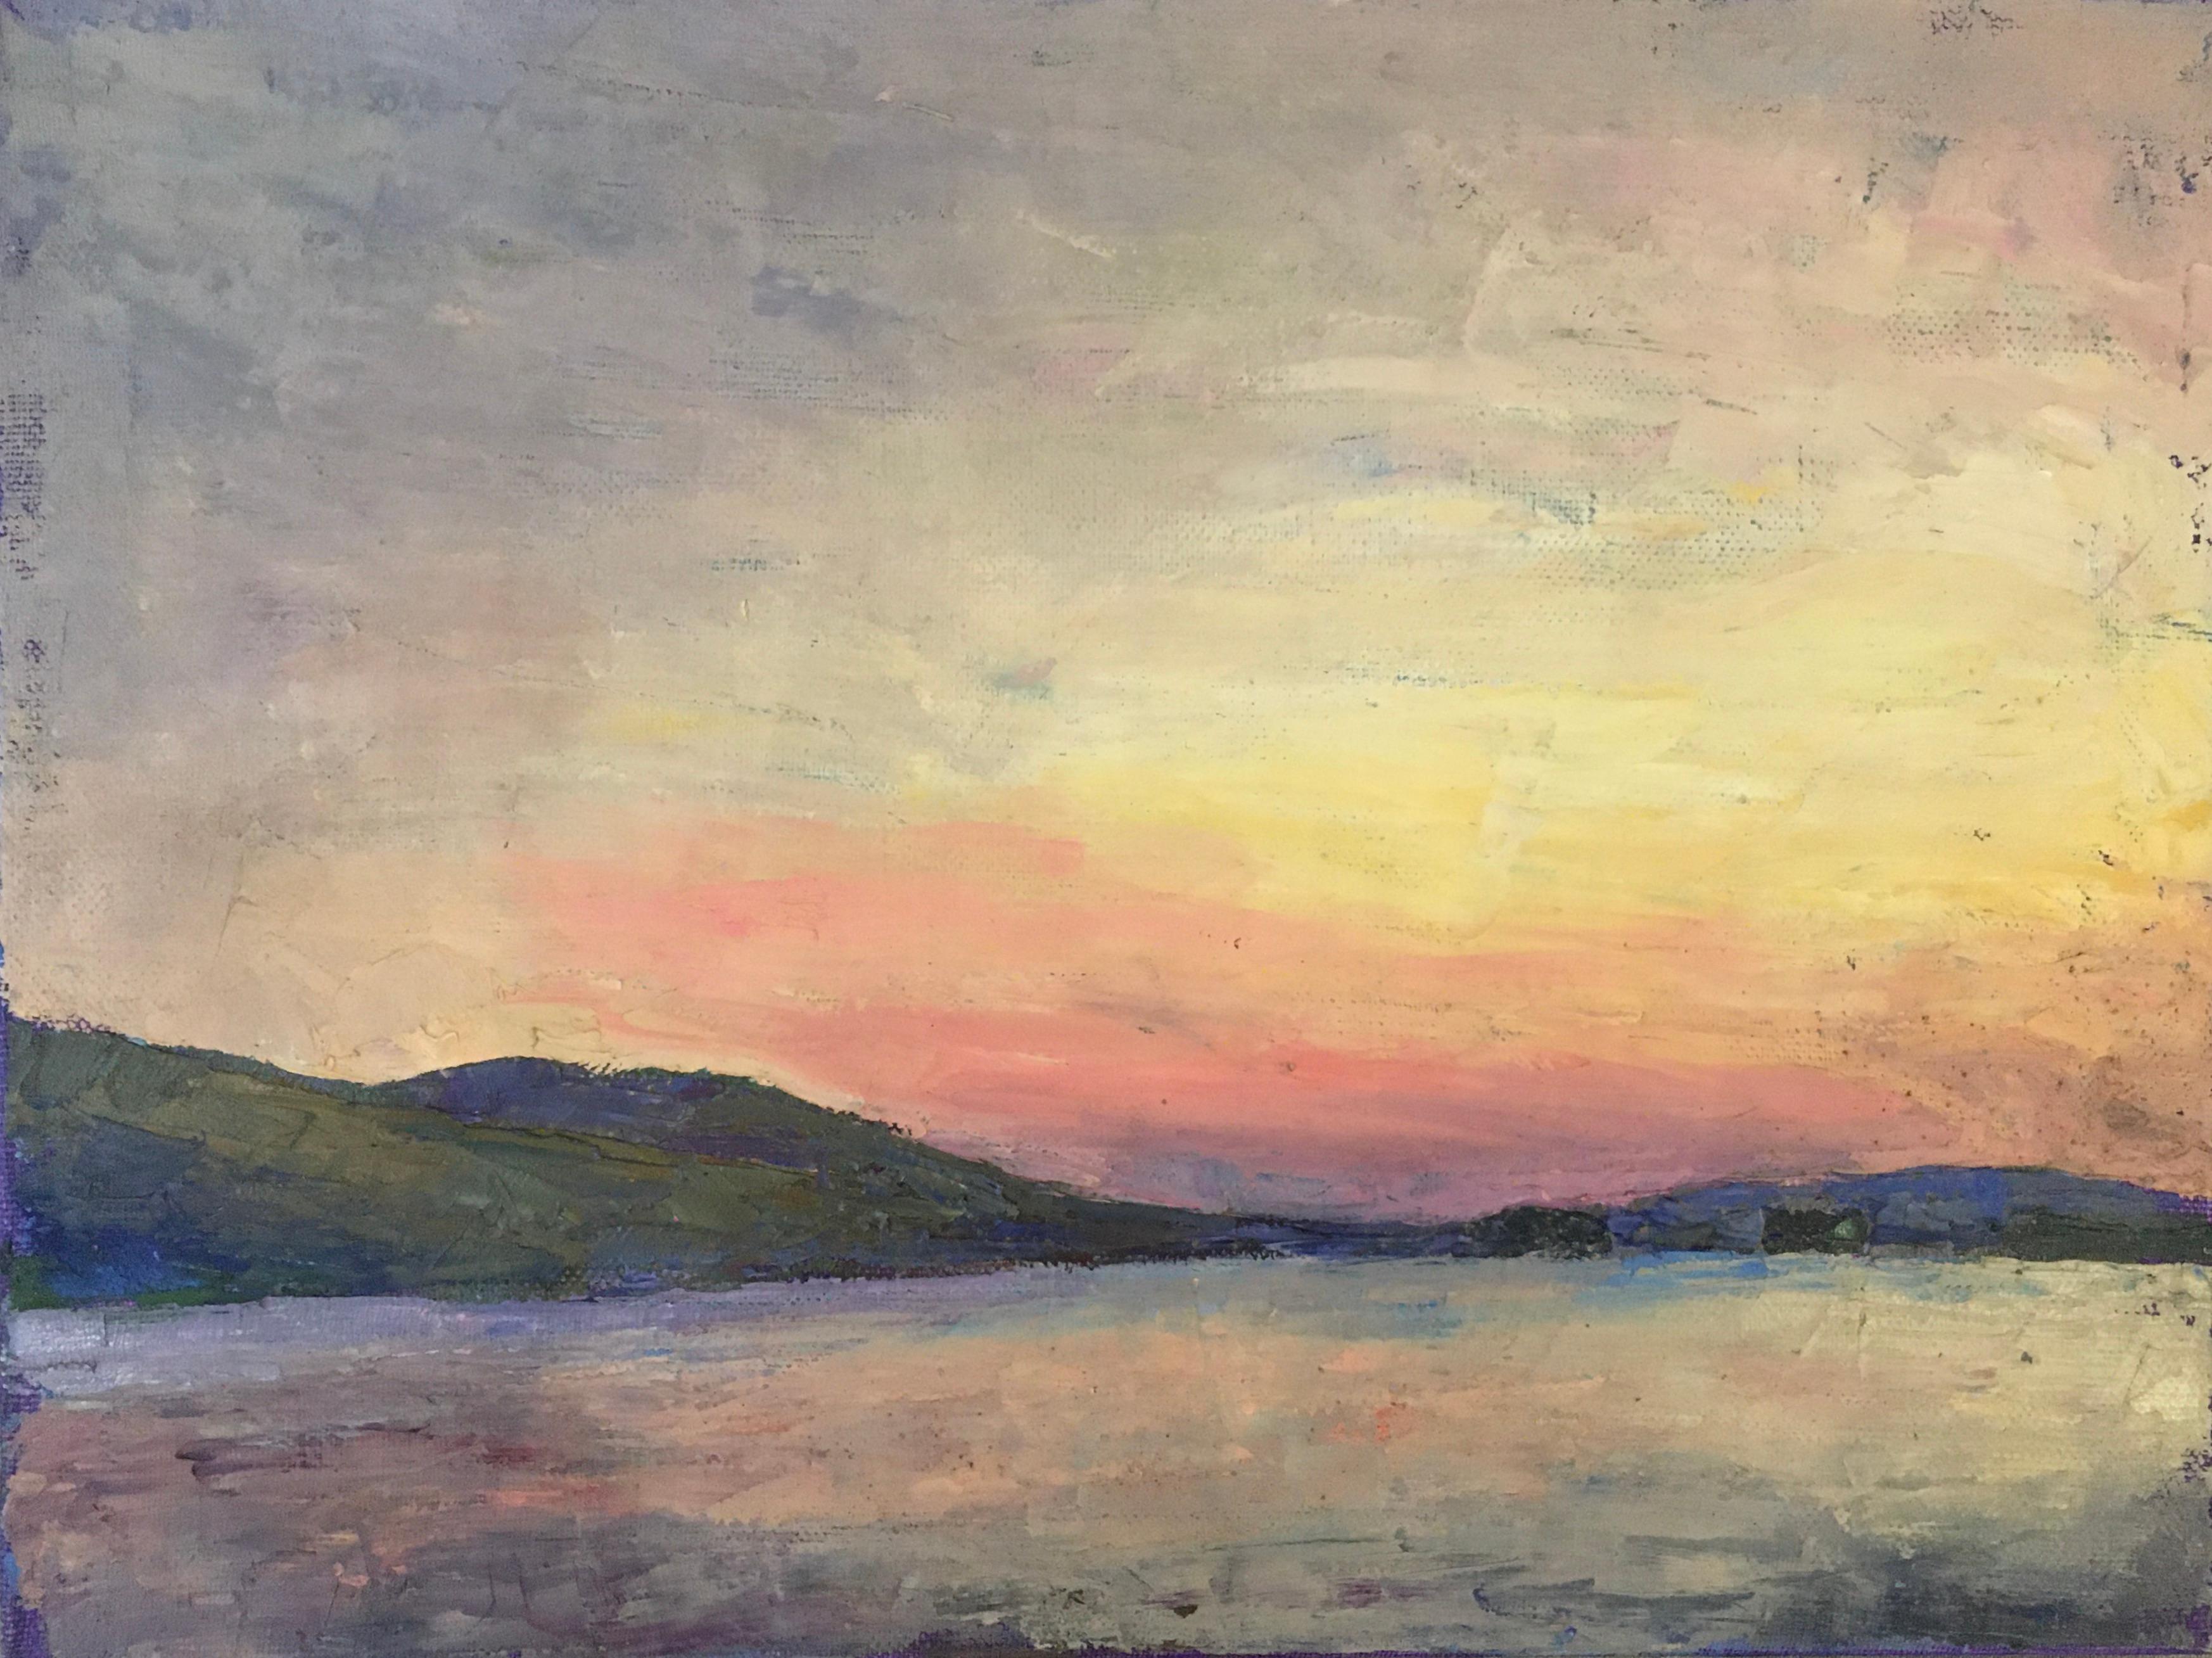 Larry Horowitz Landscape Painting - "Lake" oil painting of a lake with hills and an orange and yellow sunset behind